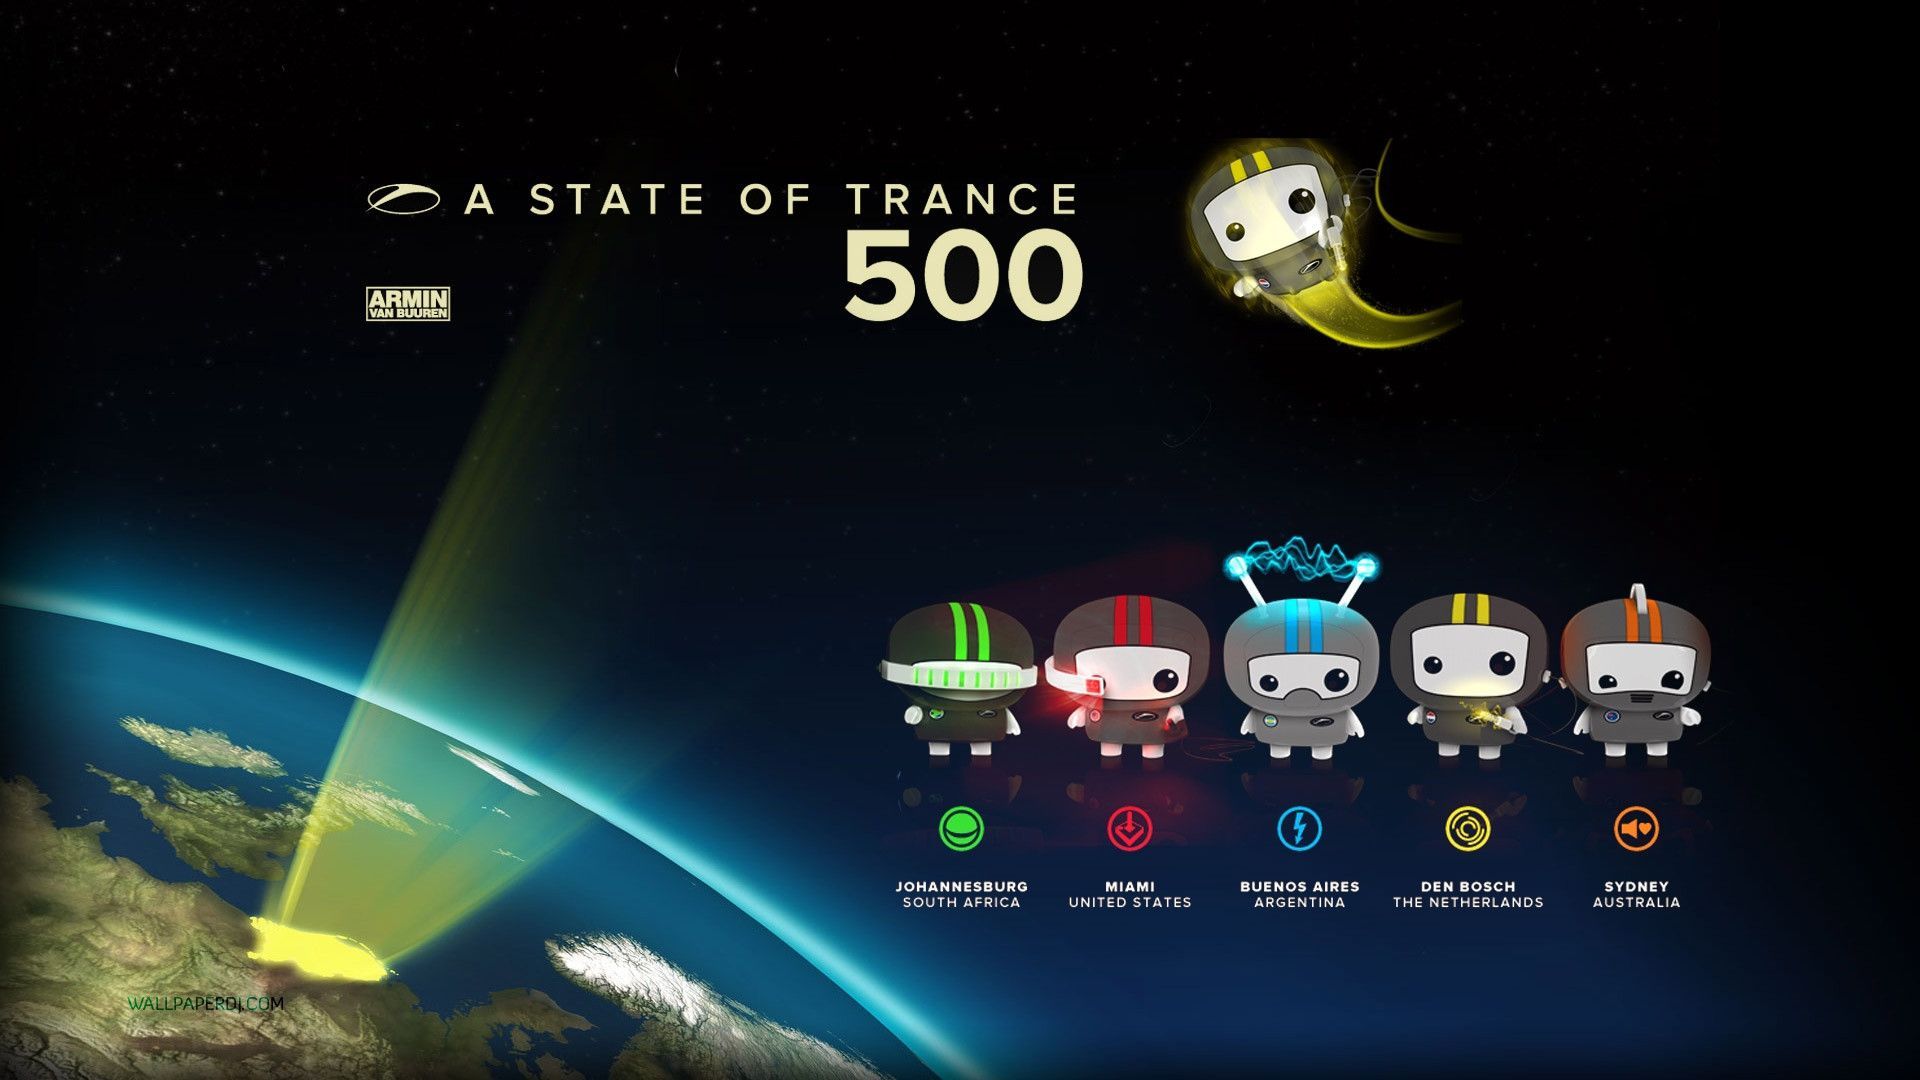 A State of Trance 500 (ASOT 500